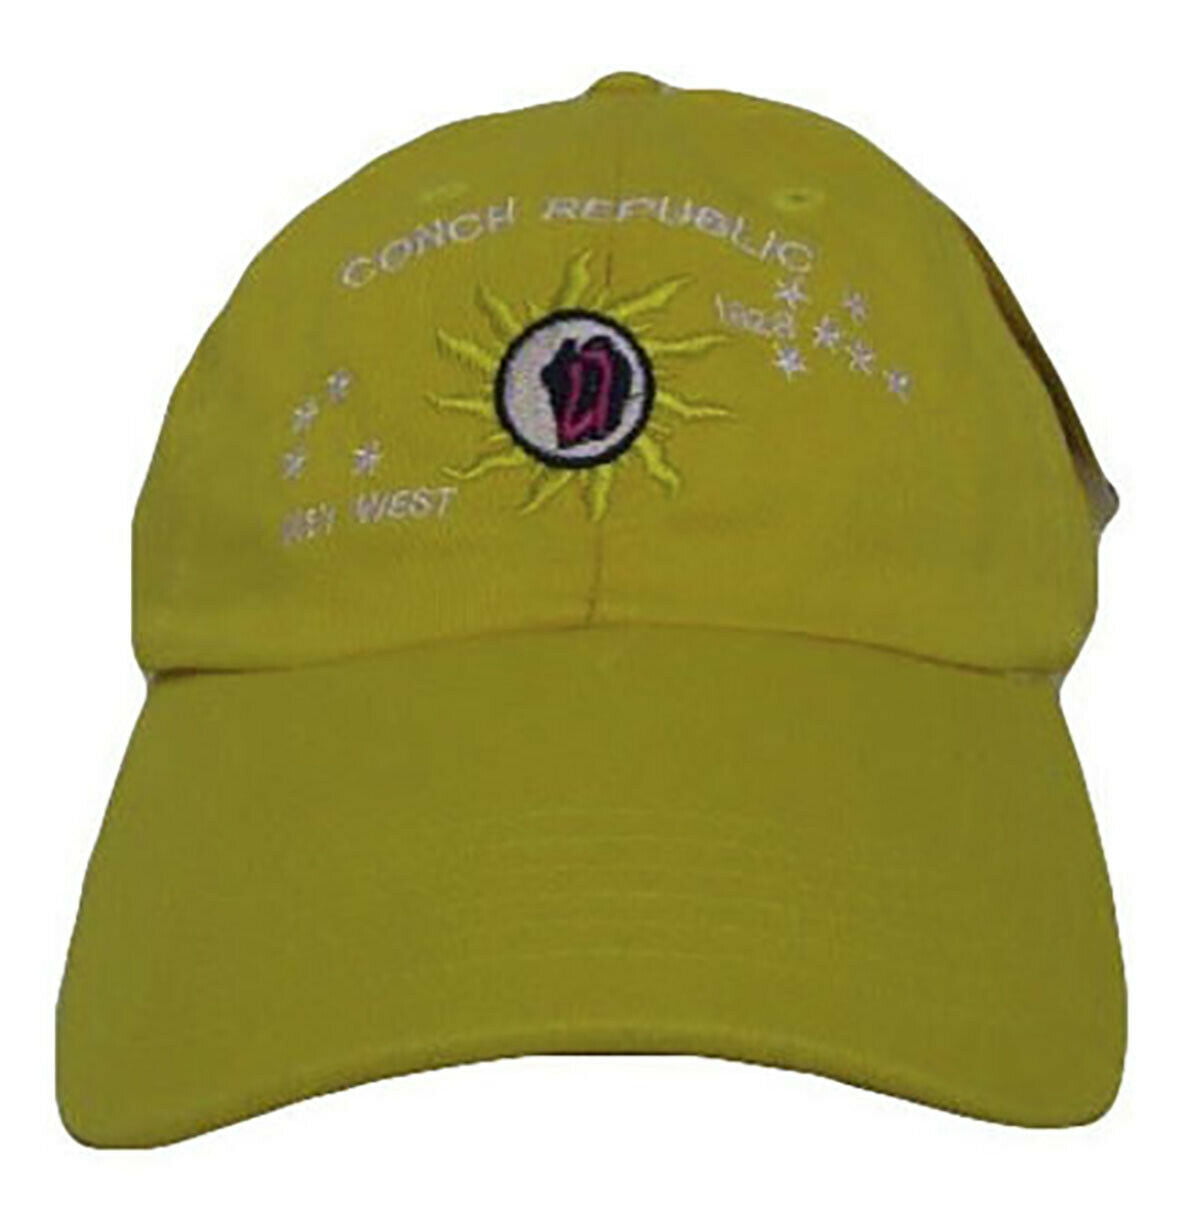 Embroidered Bright Yellow Key West Conch Republic Hat Cap